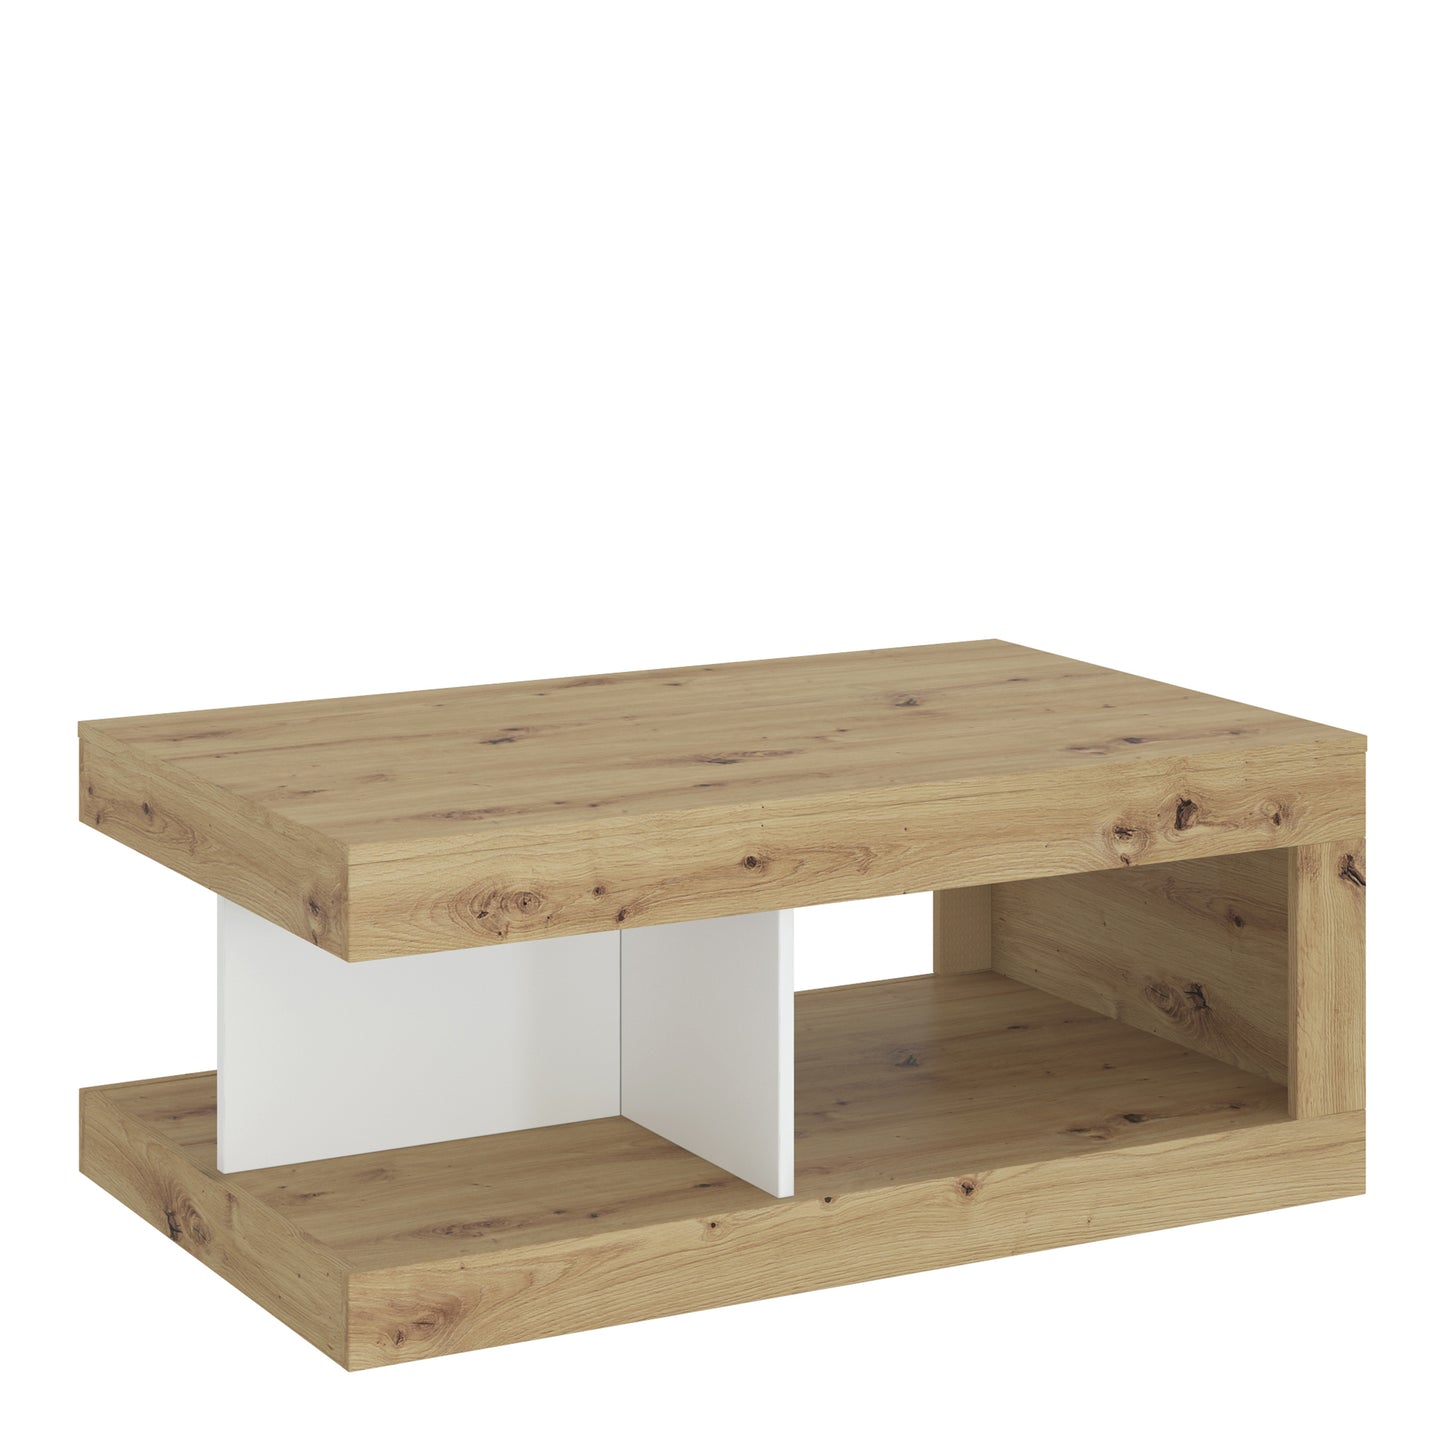 Luci Bright Luci Coffee table in White, Oak and Platinum